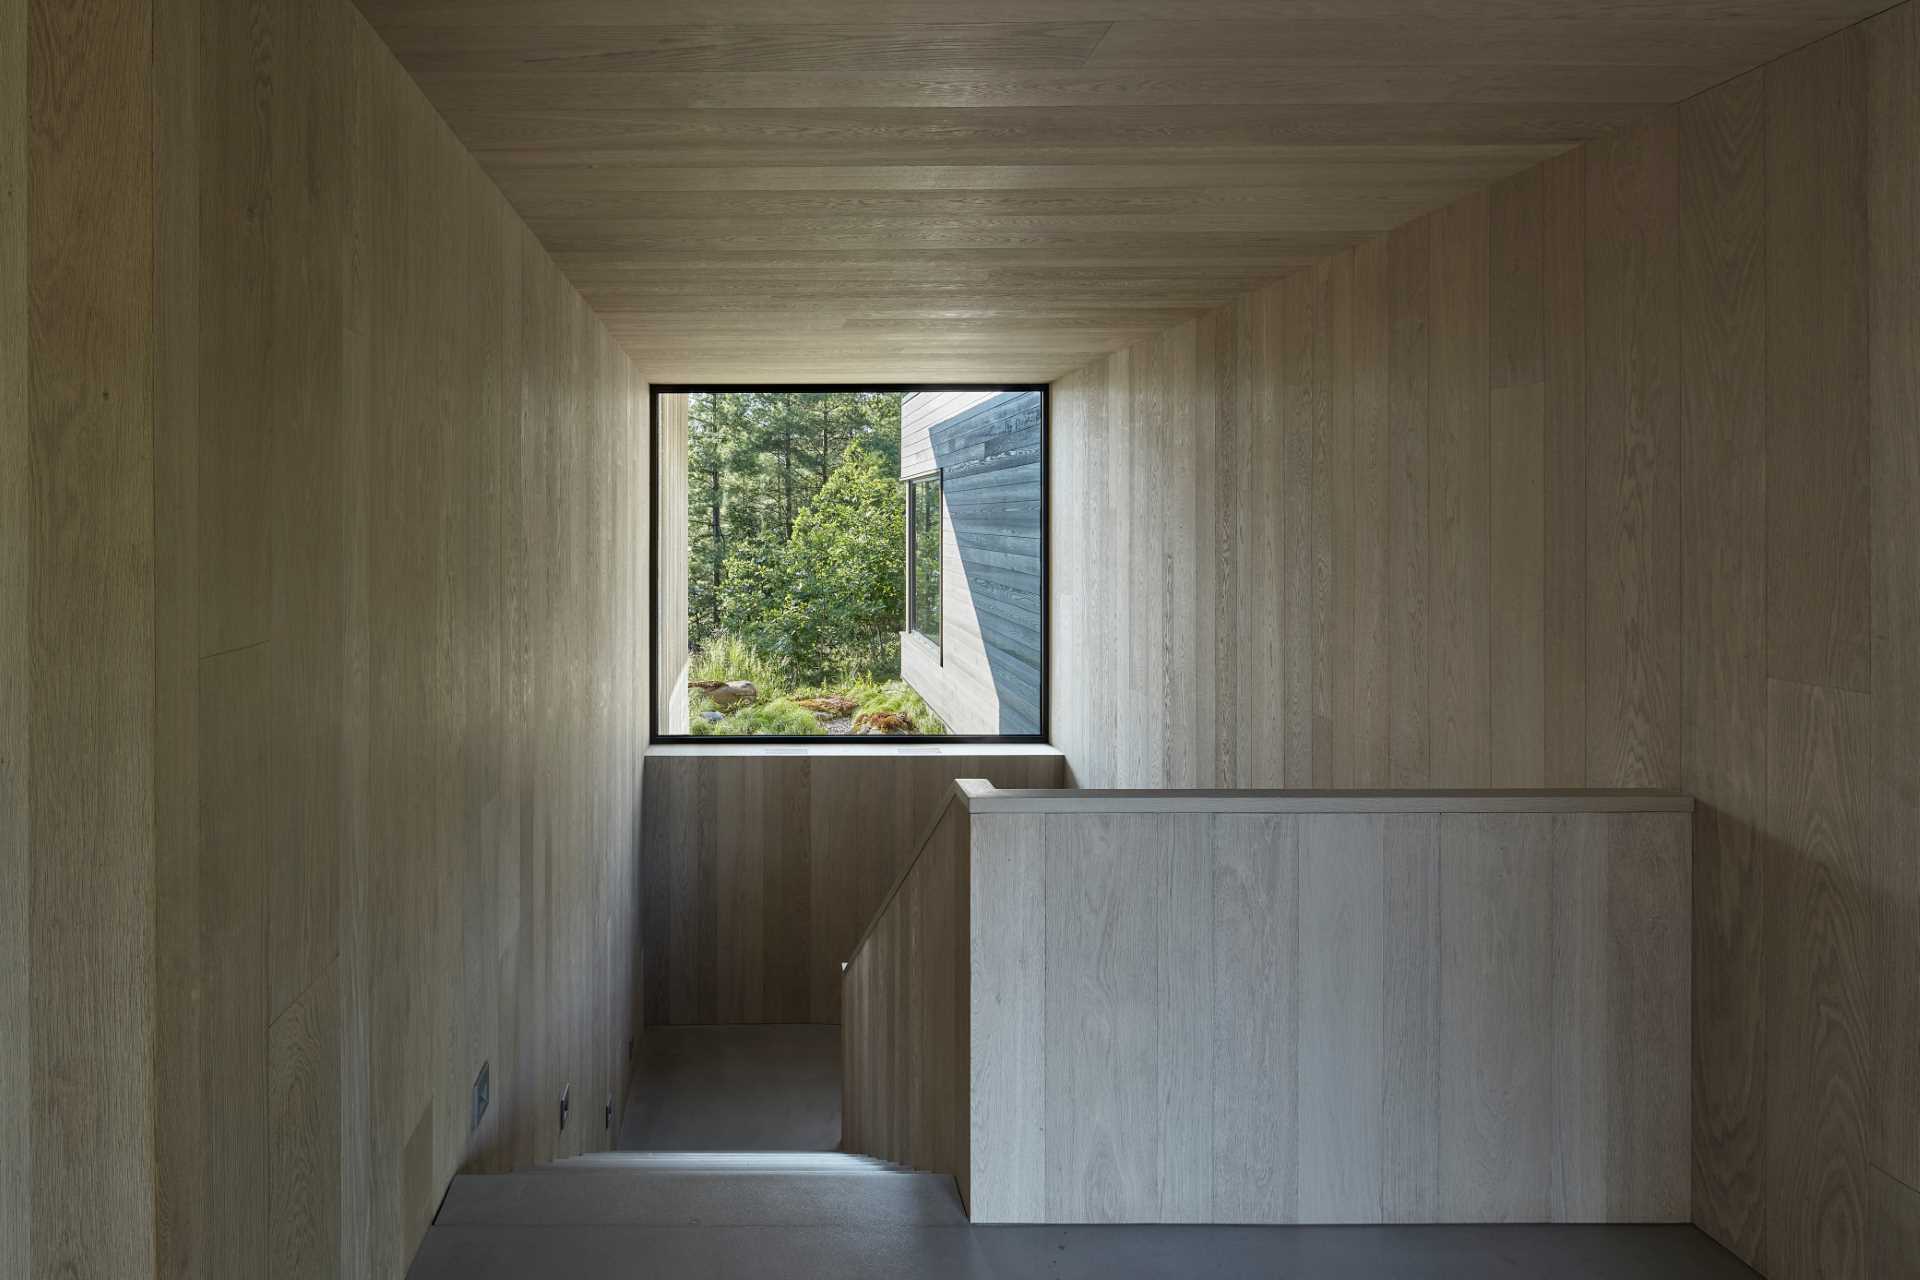 A punch window at the top of the staircase frames the view of the trees and adds natural light to the interior.